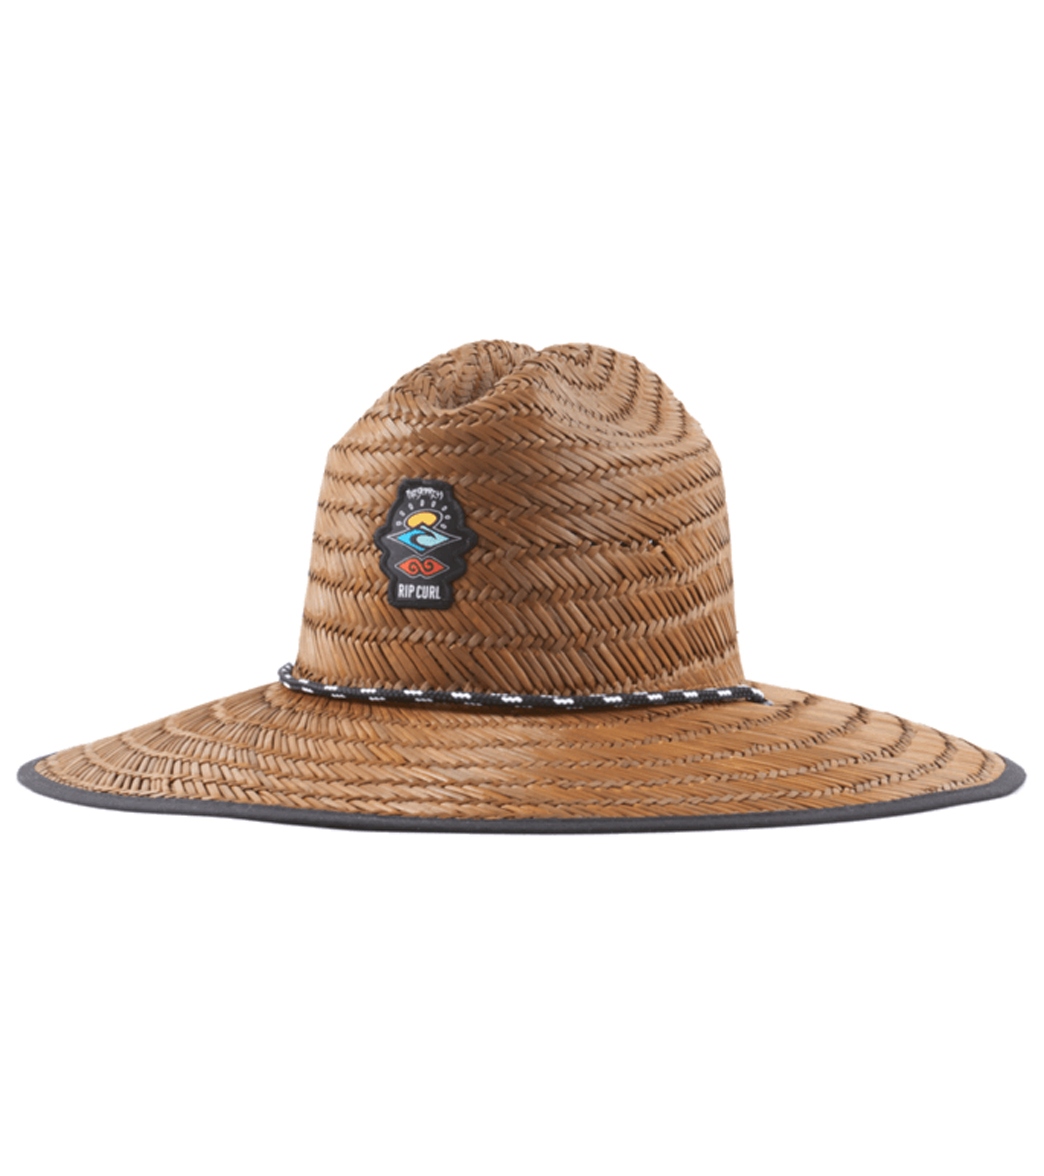 Rip Curl Men's Icons Straw Hat - Brown Small/Medium - Swimoutlet.com